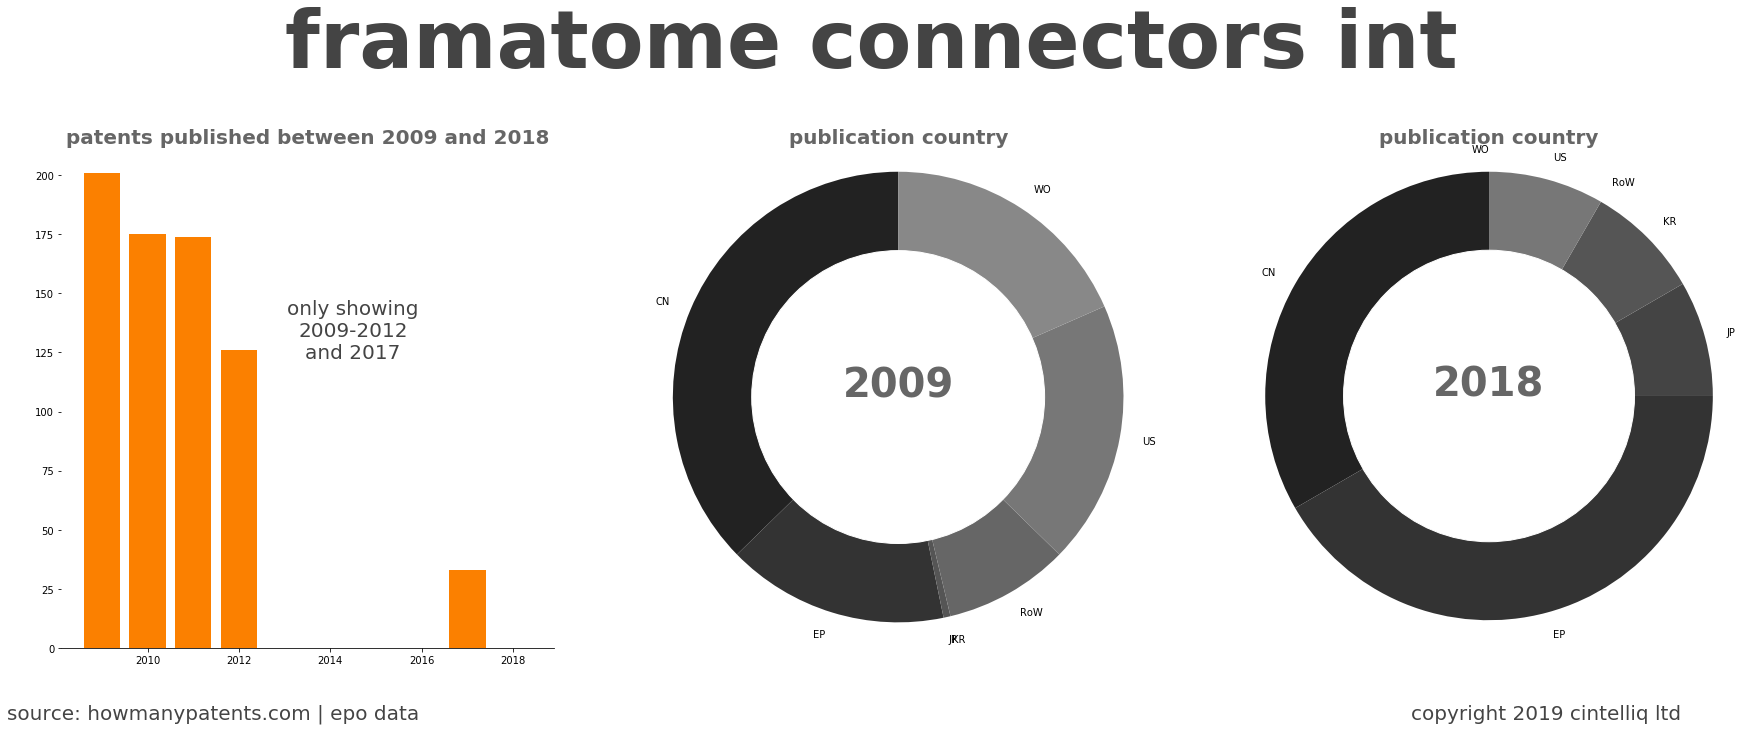 summary of patents for Framatome Connectors Int